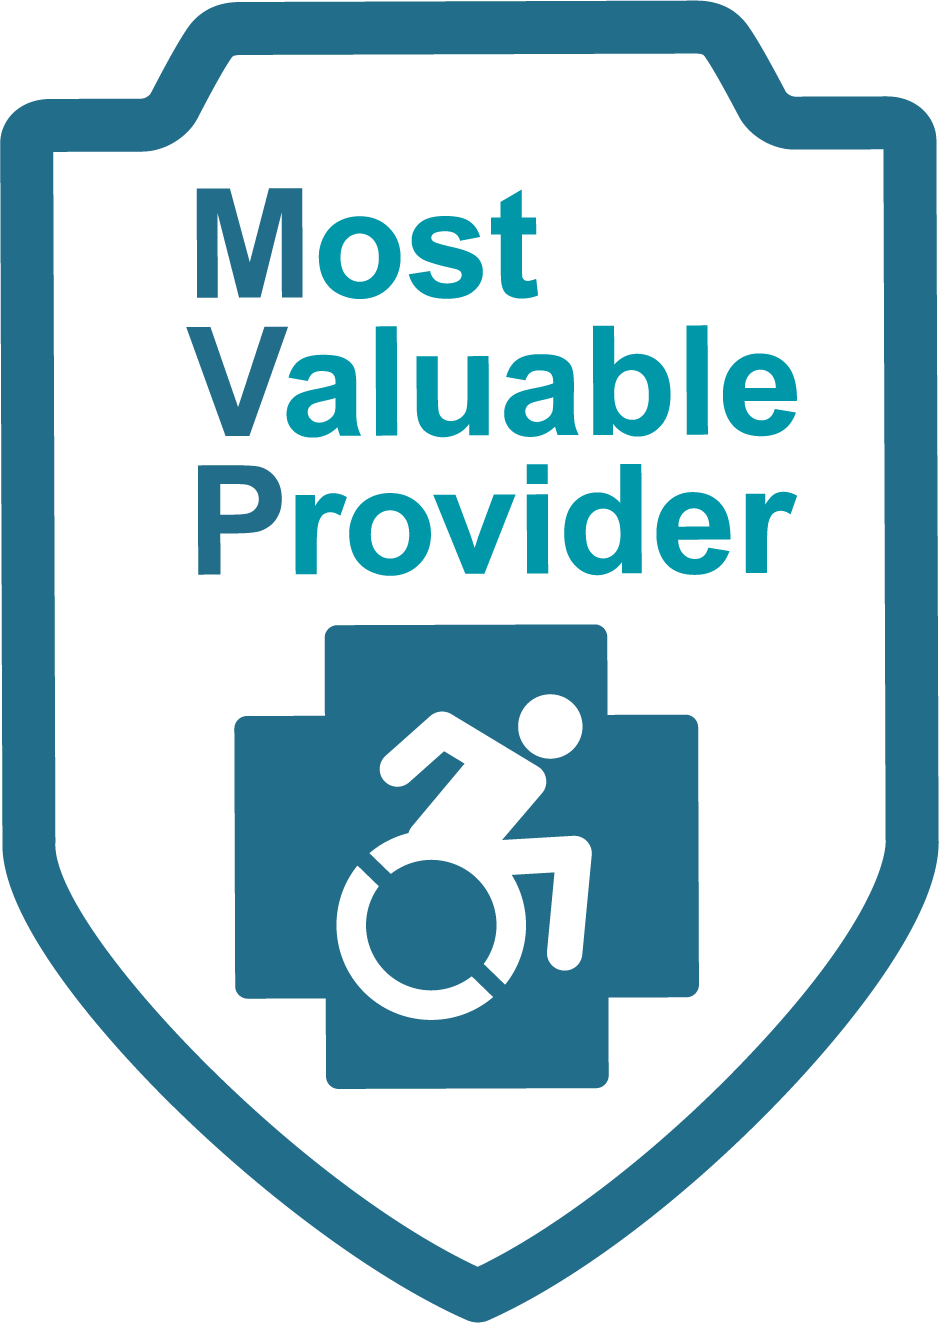 Outline of a shield in blue. The words Most Valuable Provider are found inside the outline. Under the words is an icon of a person using a wheelchair and a blue medical cross.